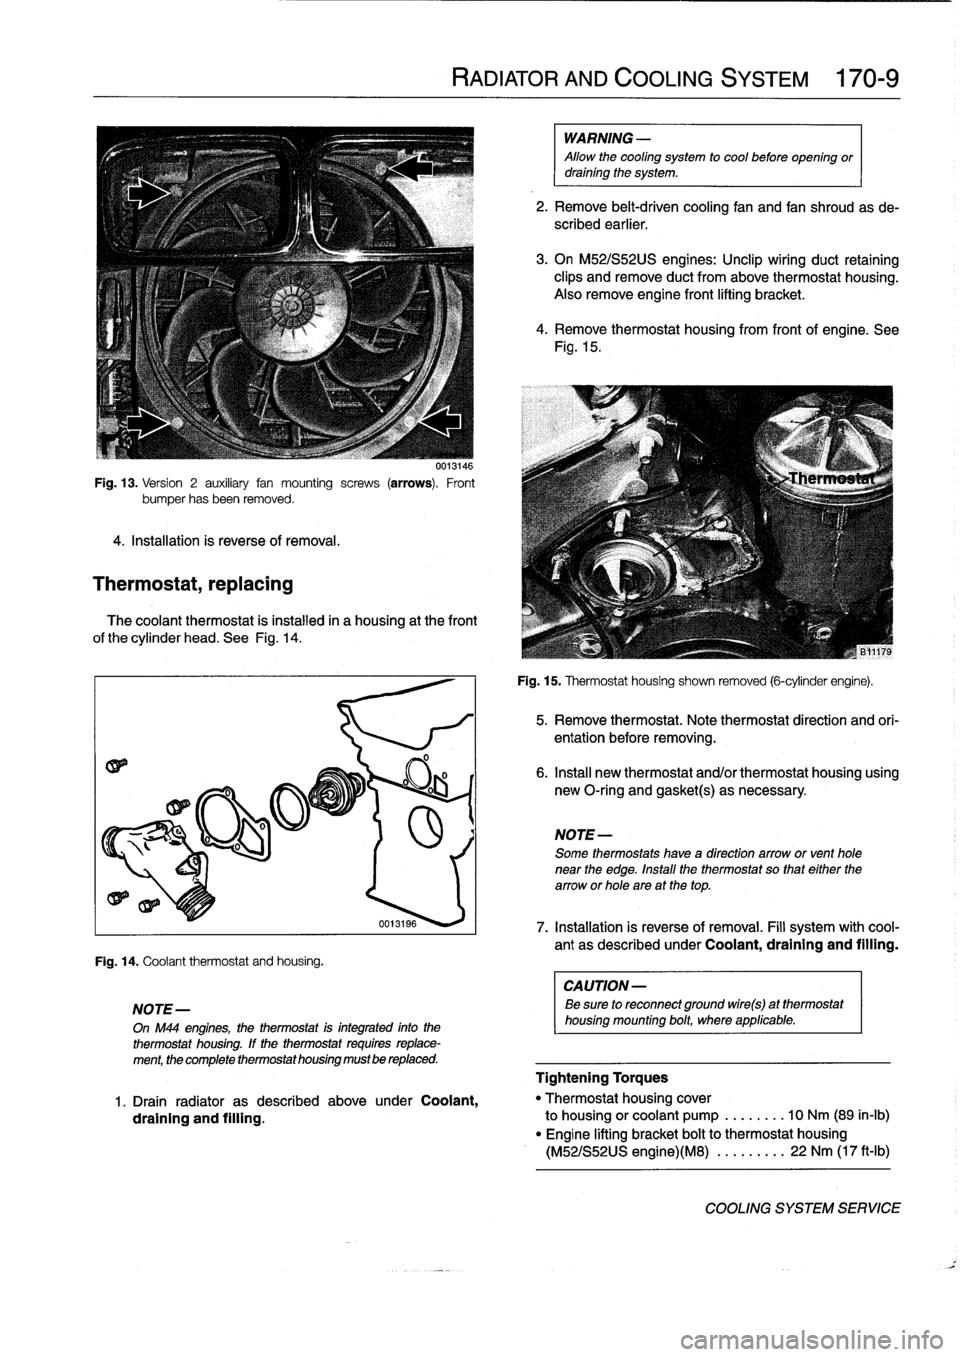 BMW M3 1994 E36 Workshop Manual 
Fig
.
13
.
Version
2
auxiliary
fan
mounting
screws
(arrows)
.
Front
bumper
hasbeen
removed
.

4
.
Installation
is
reverse
of
removal
.

Thermostat,
replacing

0013146

The
coolant
thermostat
is
insta